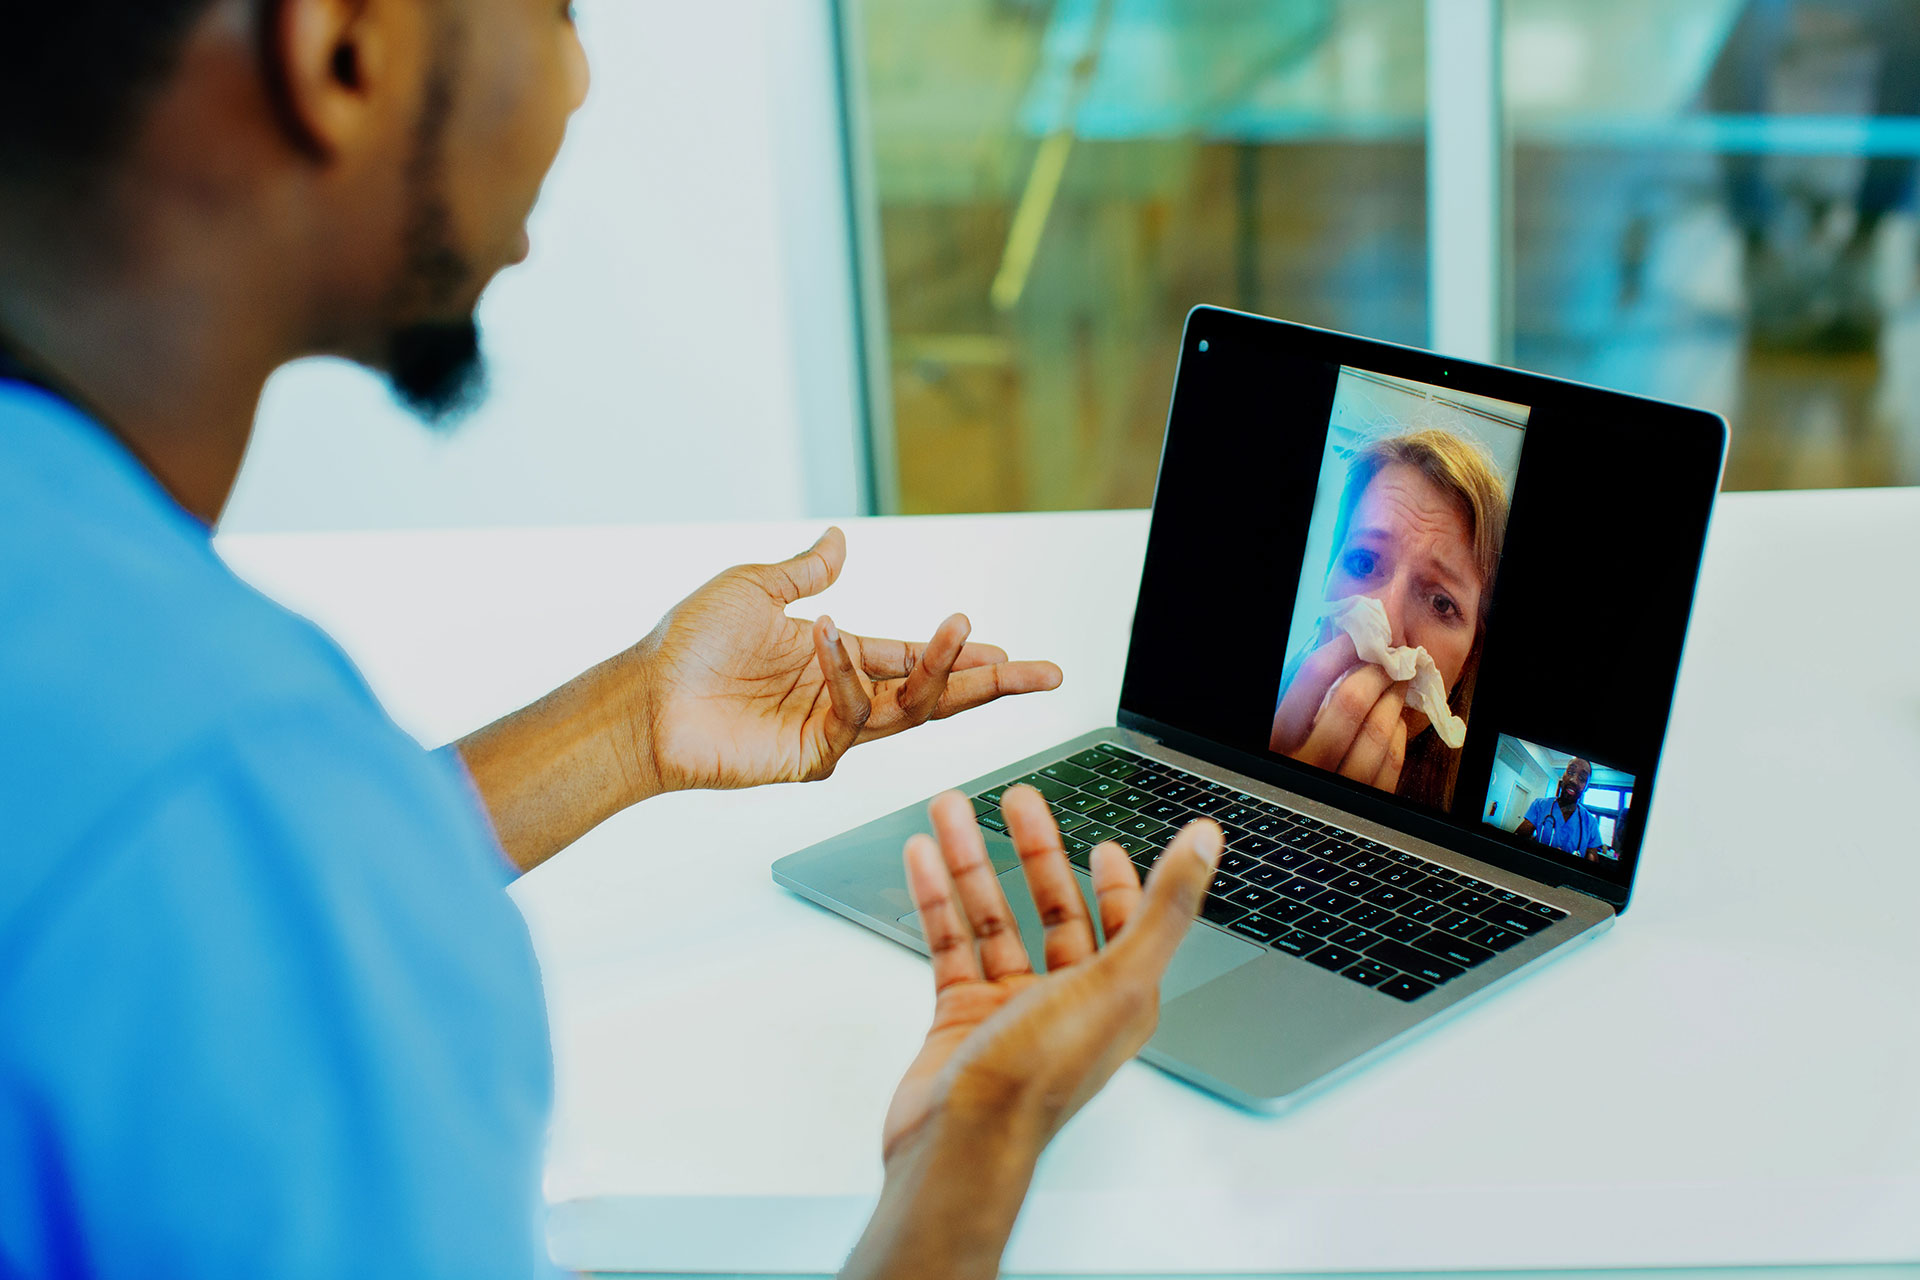 Portrait of a sick patient coughing into tissue being helped via tele medicine by a male doctor wearing blue scrubs uniform using laptop